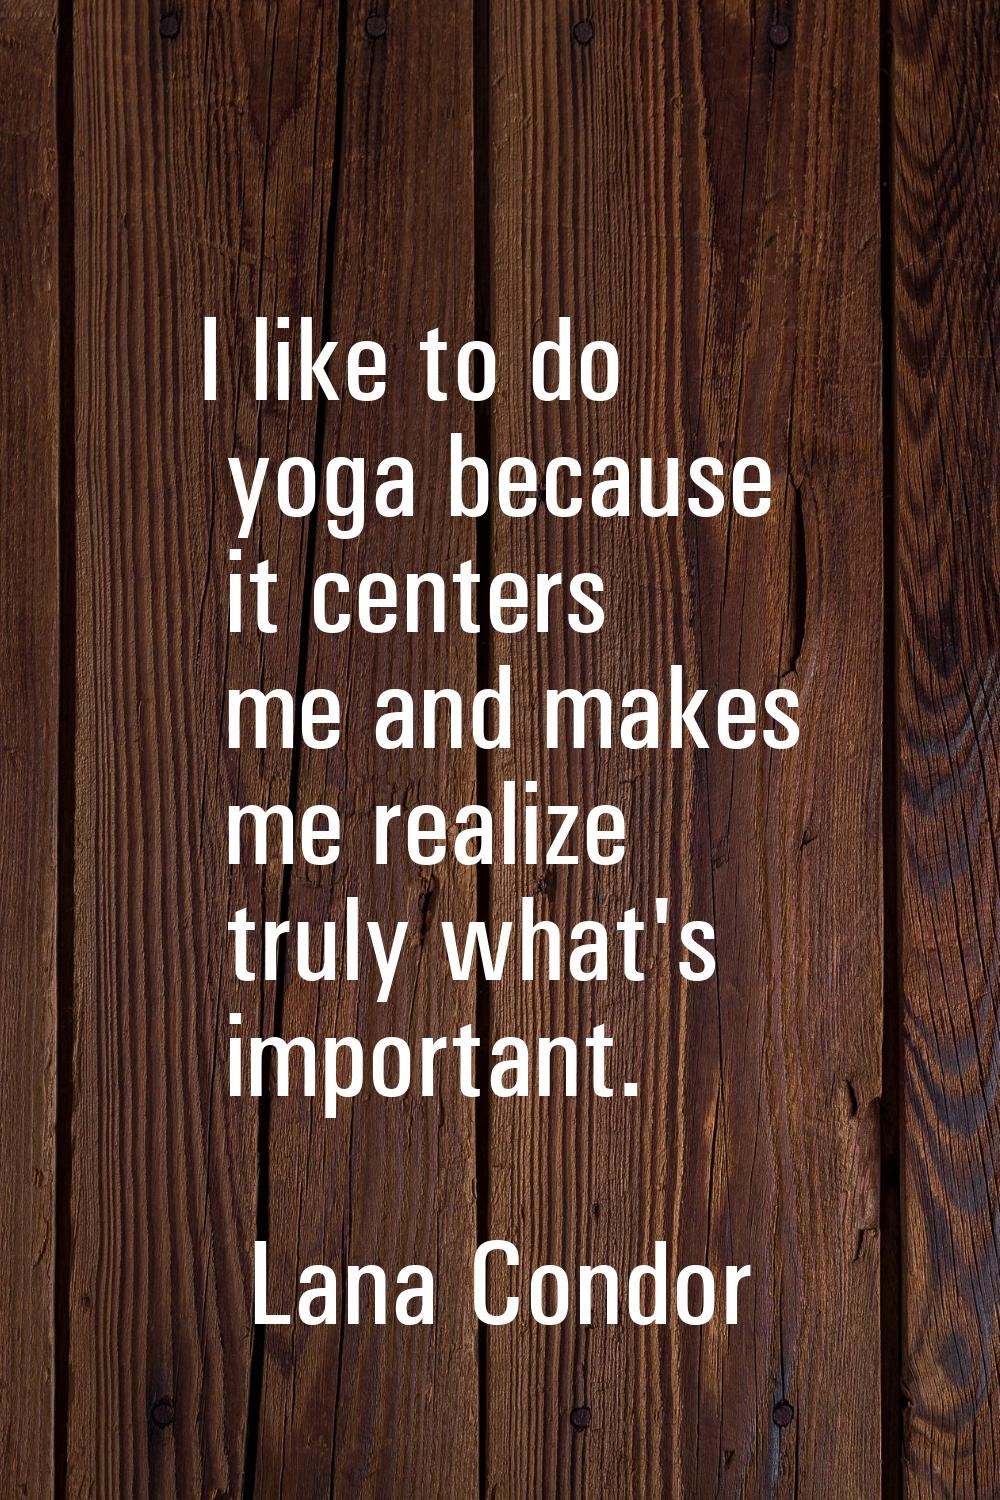 I like to do yoga because it centers me and makes me realize truly what's important.